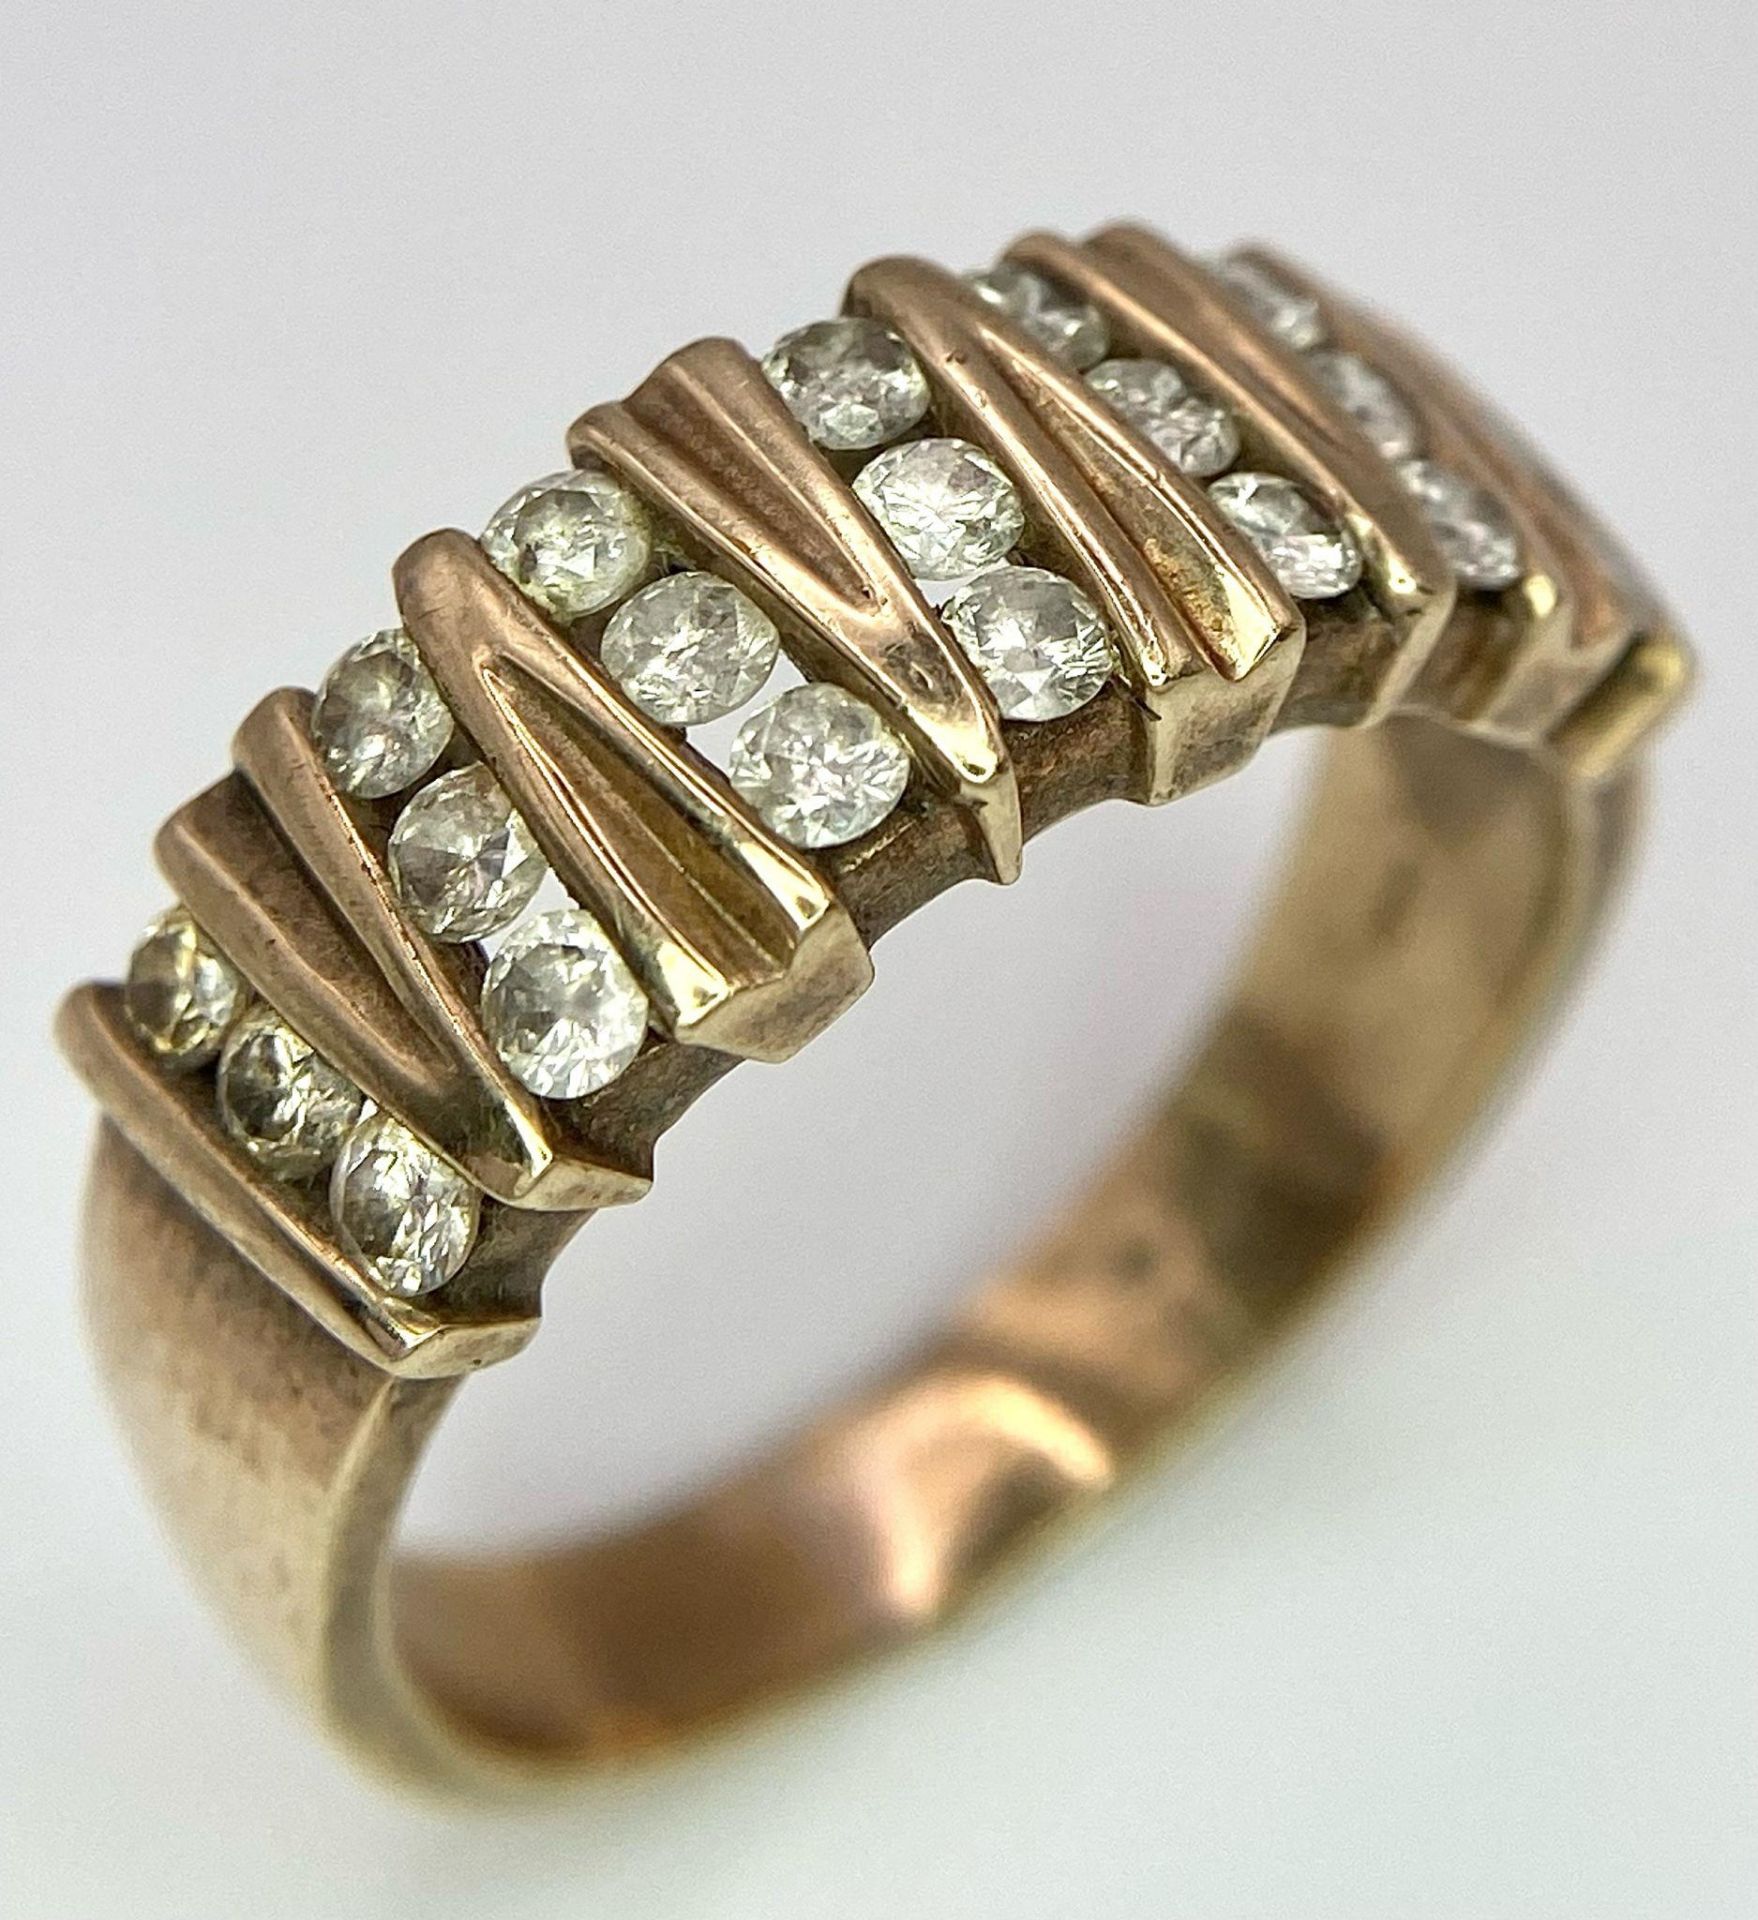 A Vintage 9K Yellow Gold 21 Diamond Ring. 1ctw of brilliant round cut diamonds. Size T. 5.9g total - Image 3 of 7